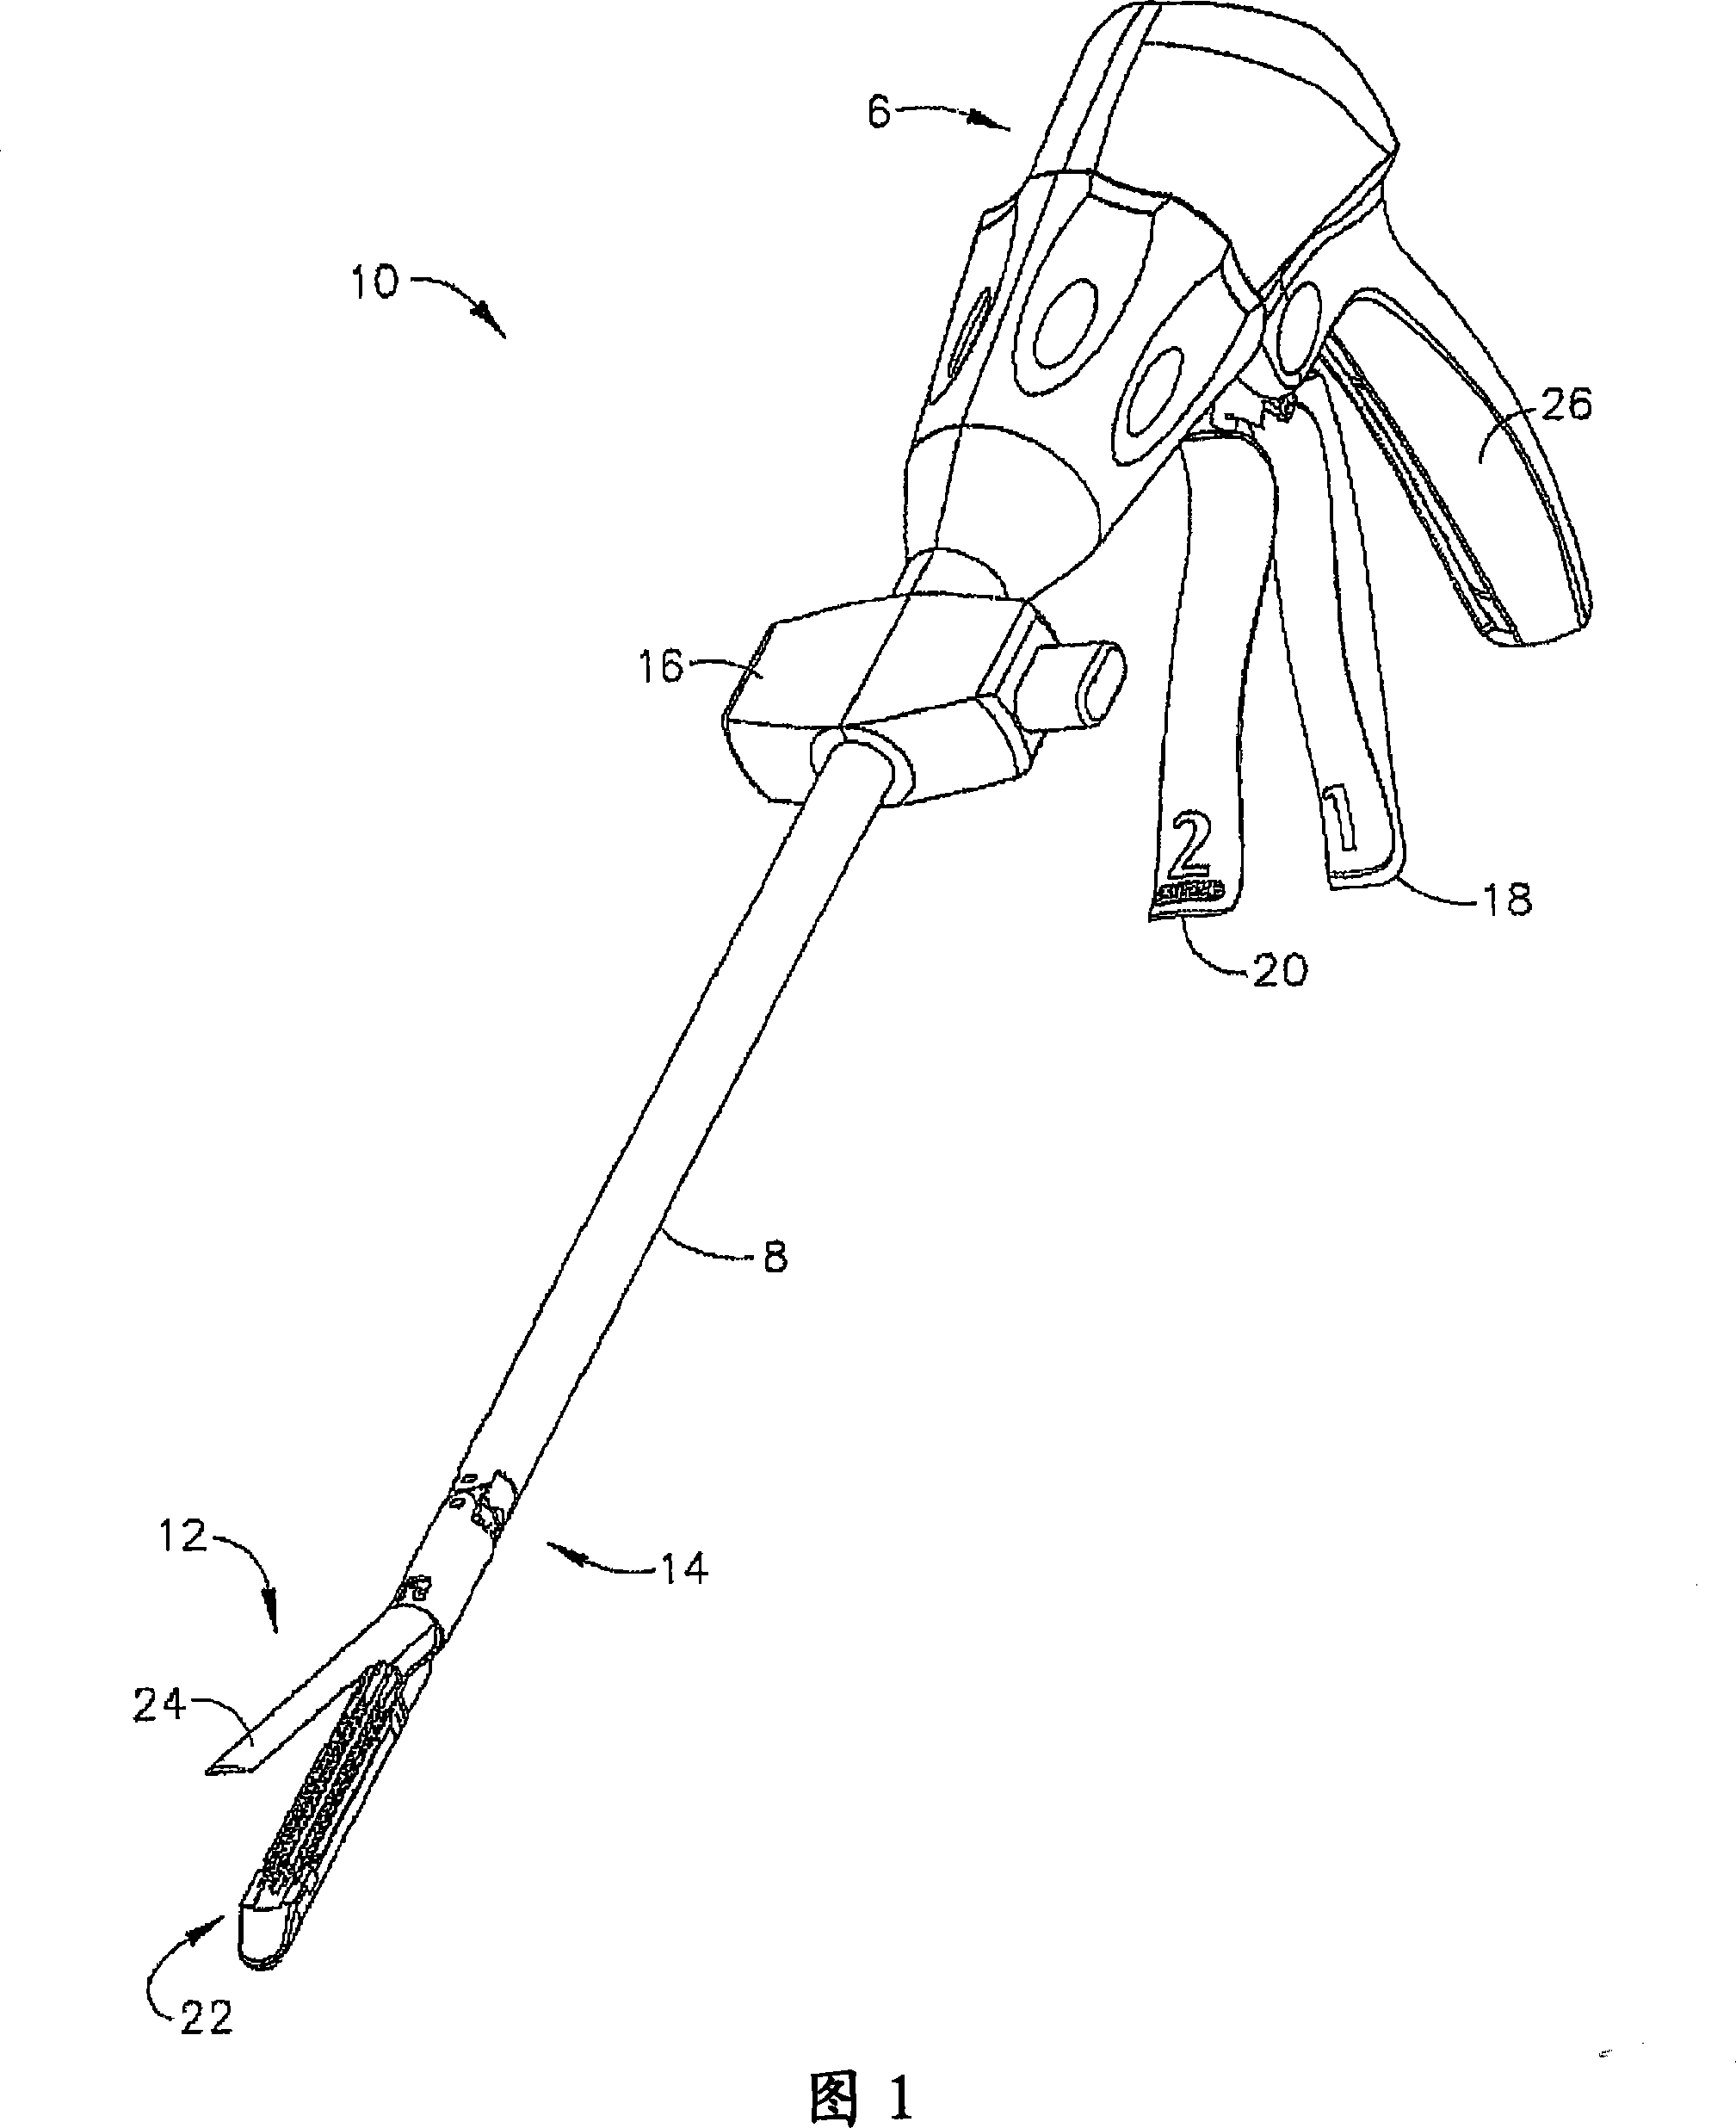 Surgical instrument with wireless communication between control unit and remote sensor